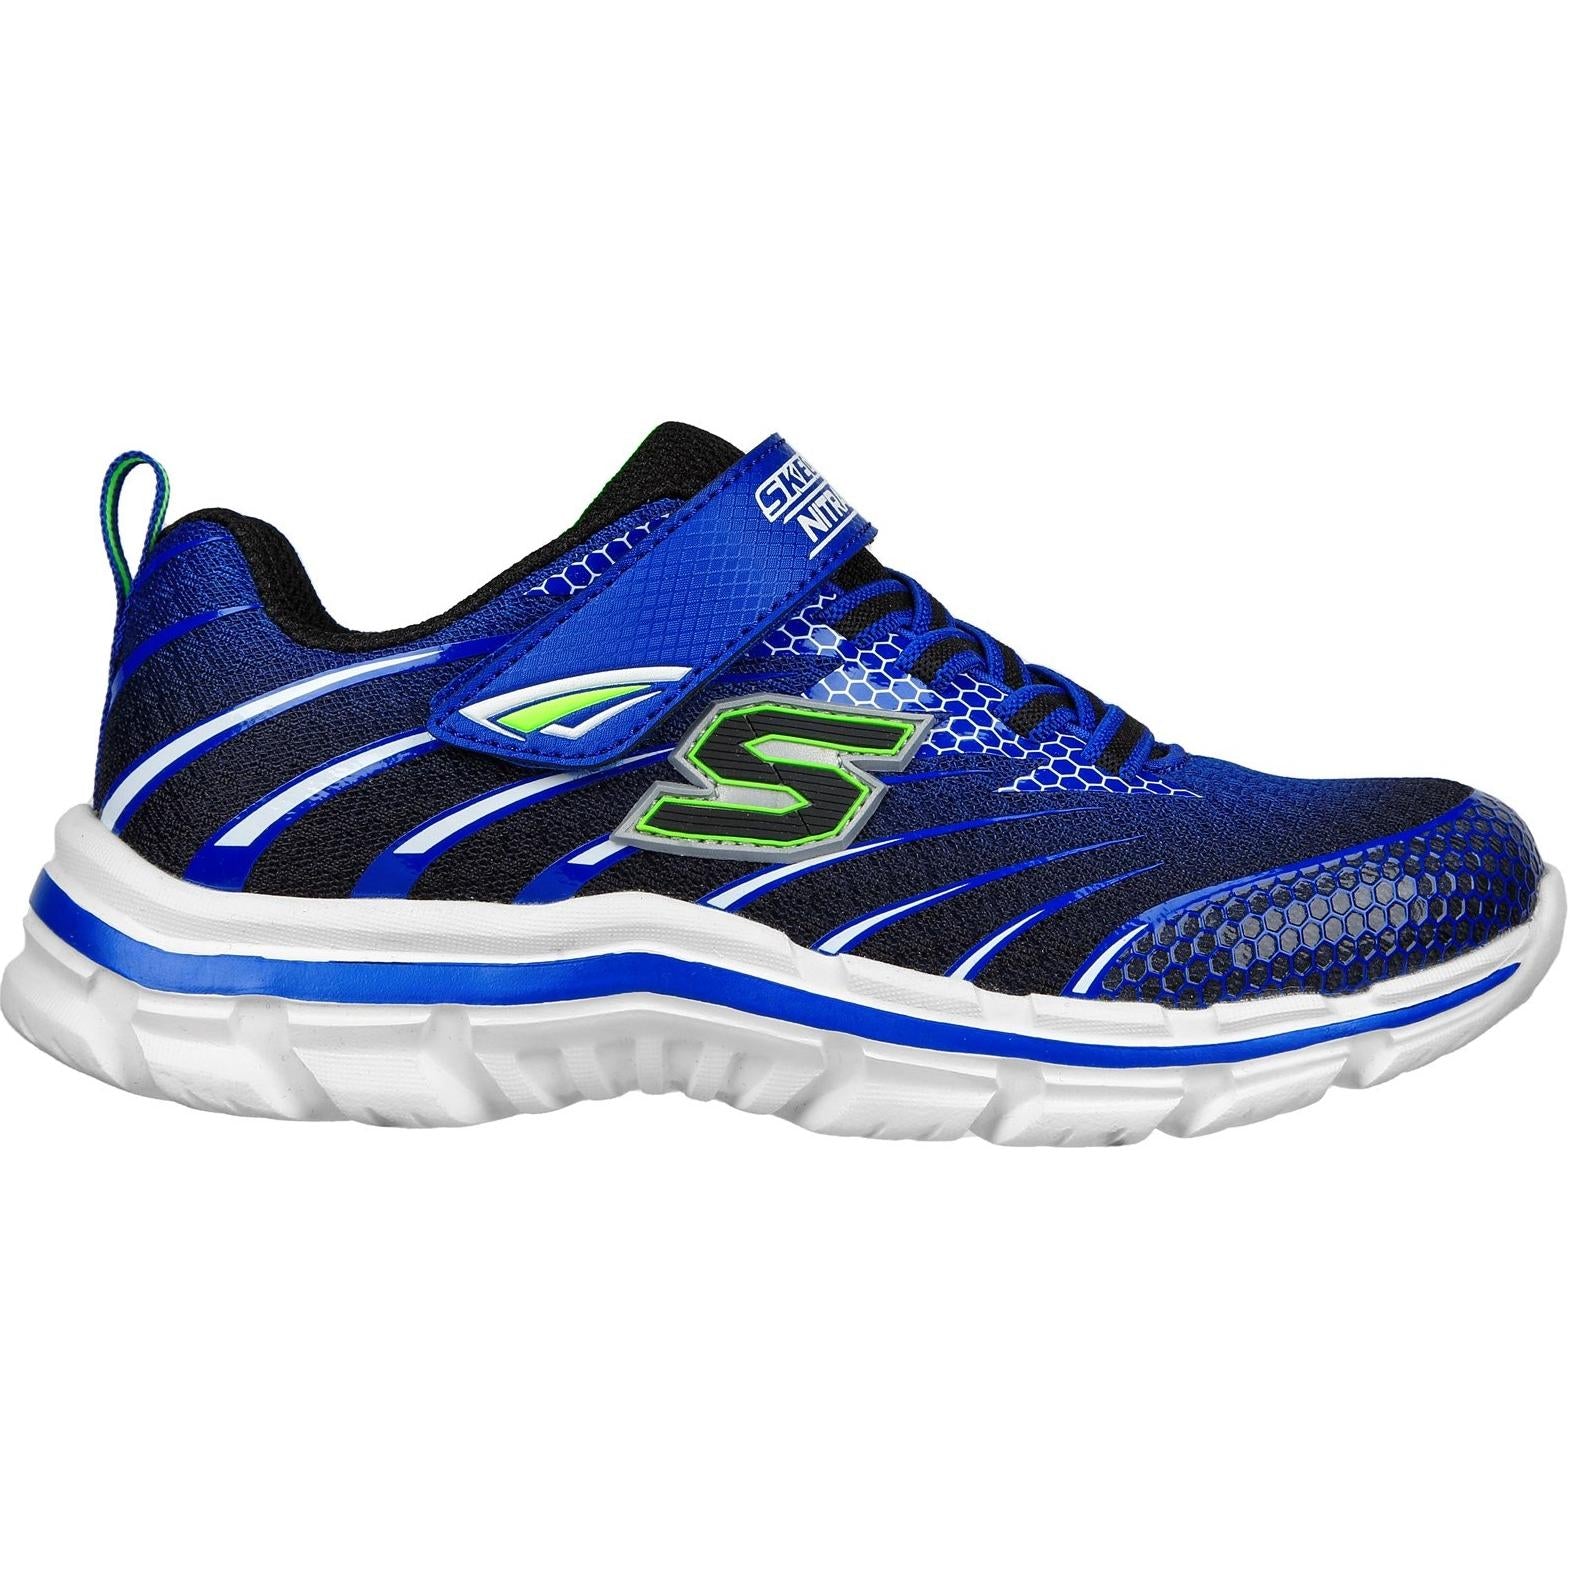 Skechers Nitrate Zulvox Trainers